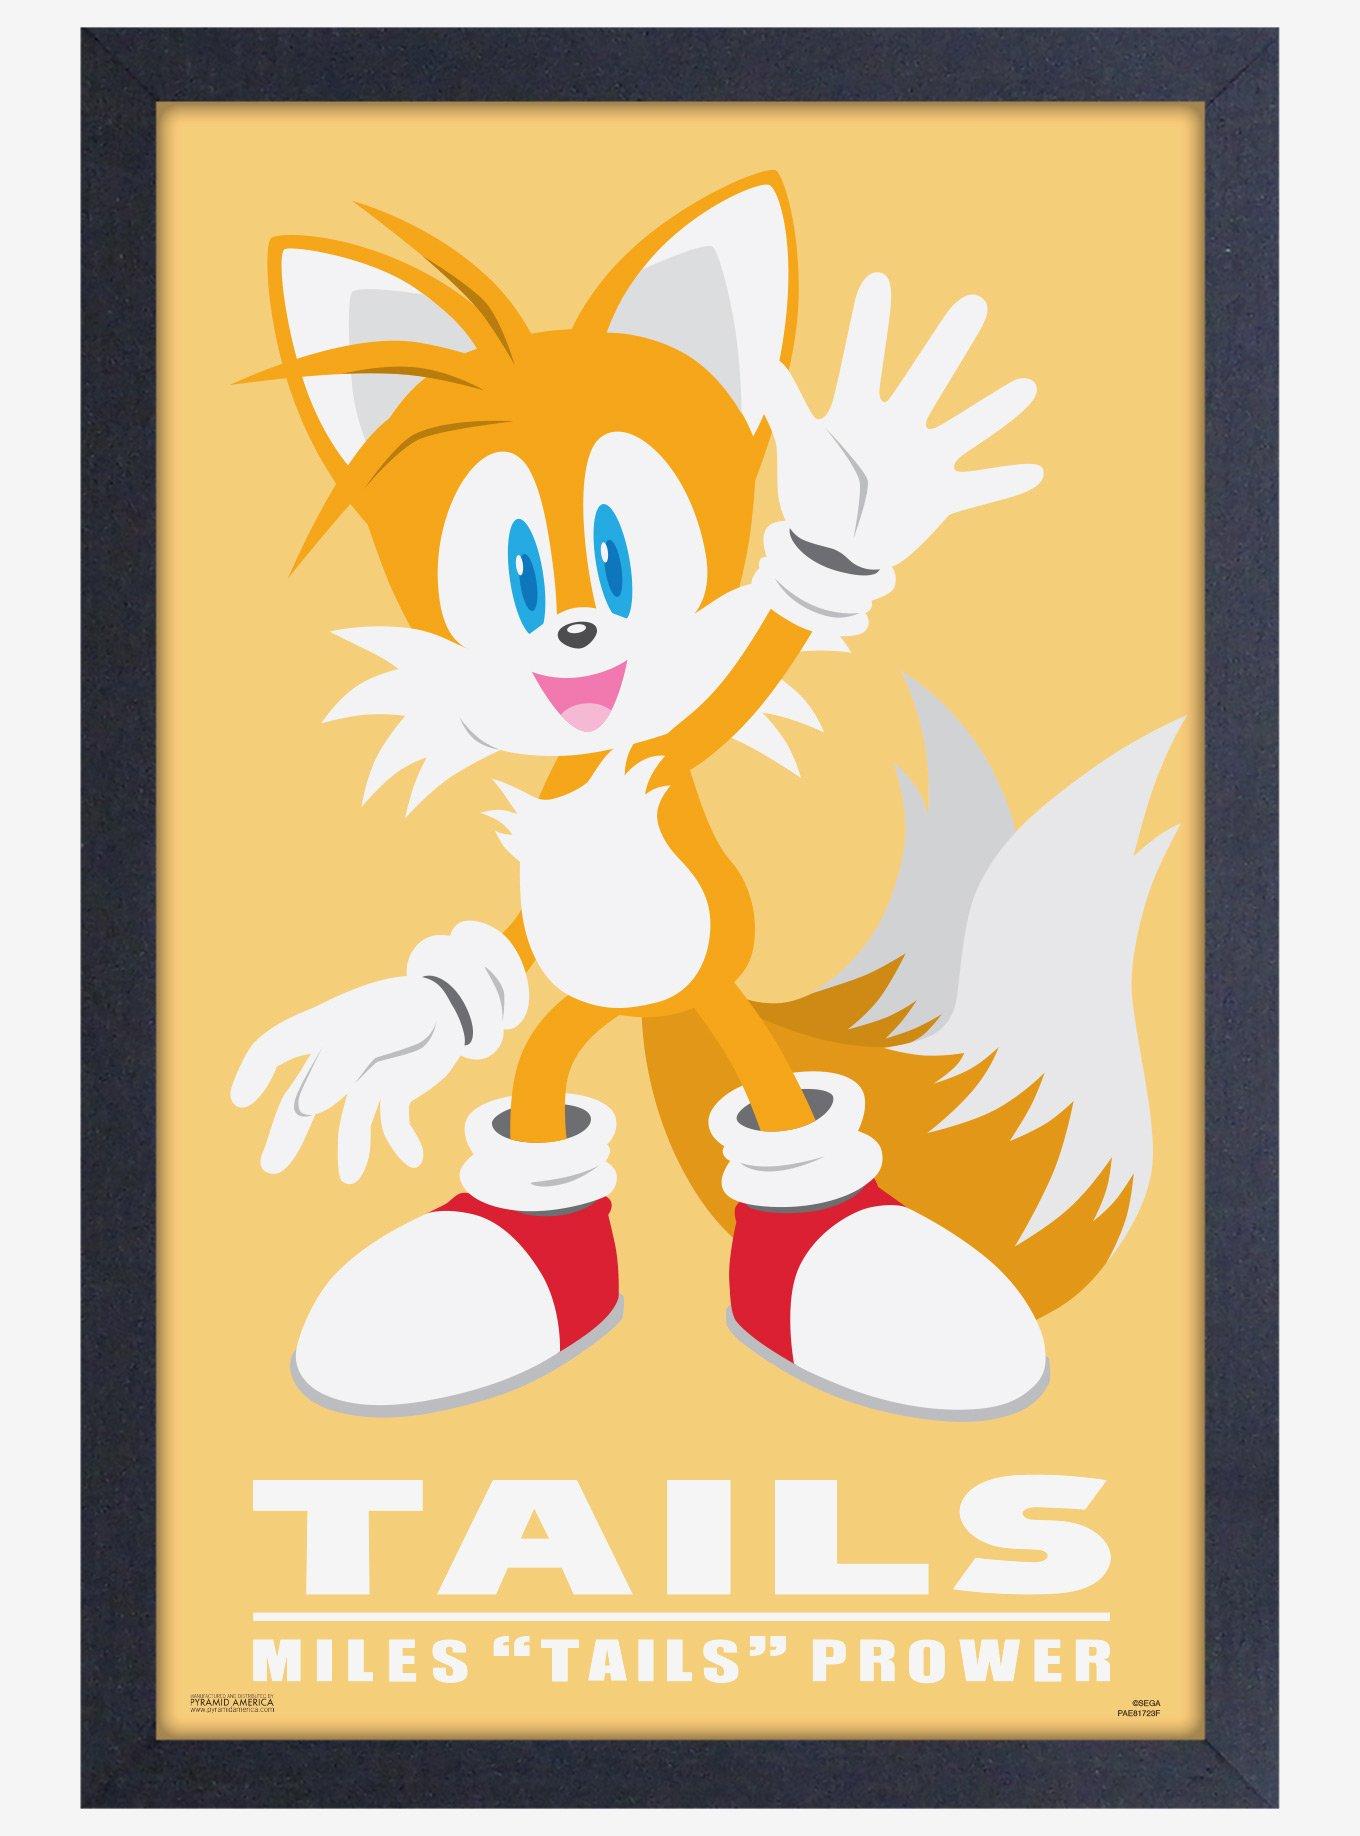 8 Tails doll ideas  tails doll, sonic art, tailed